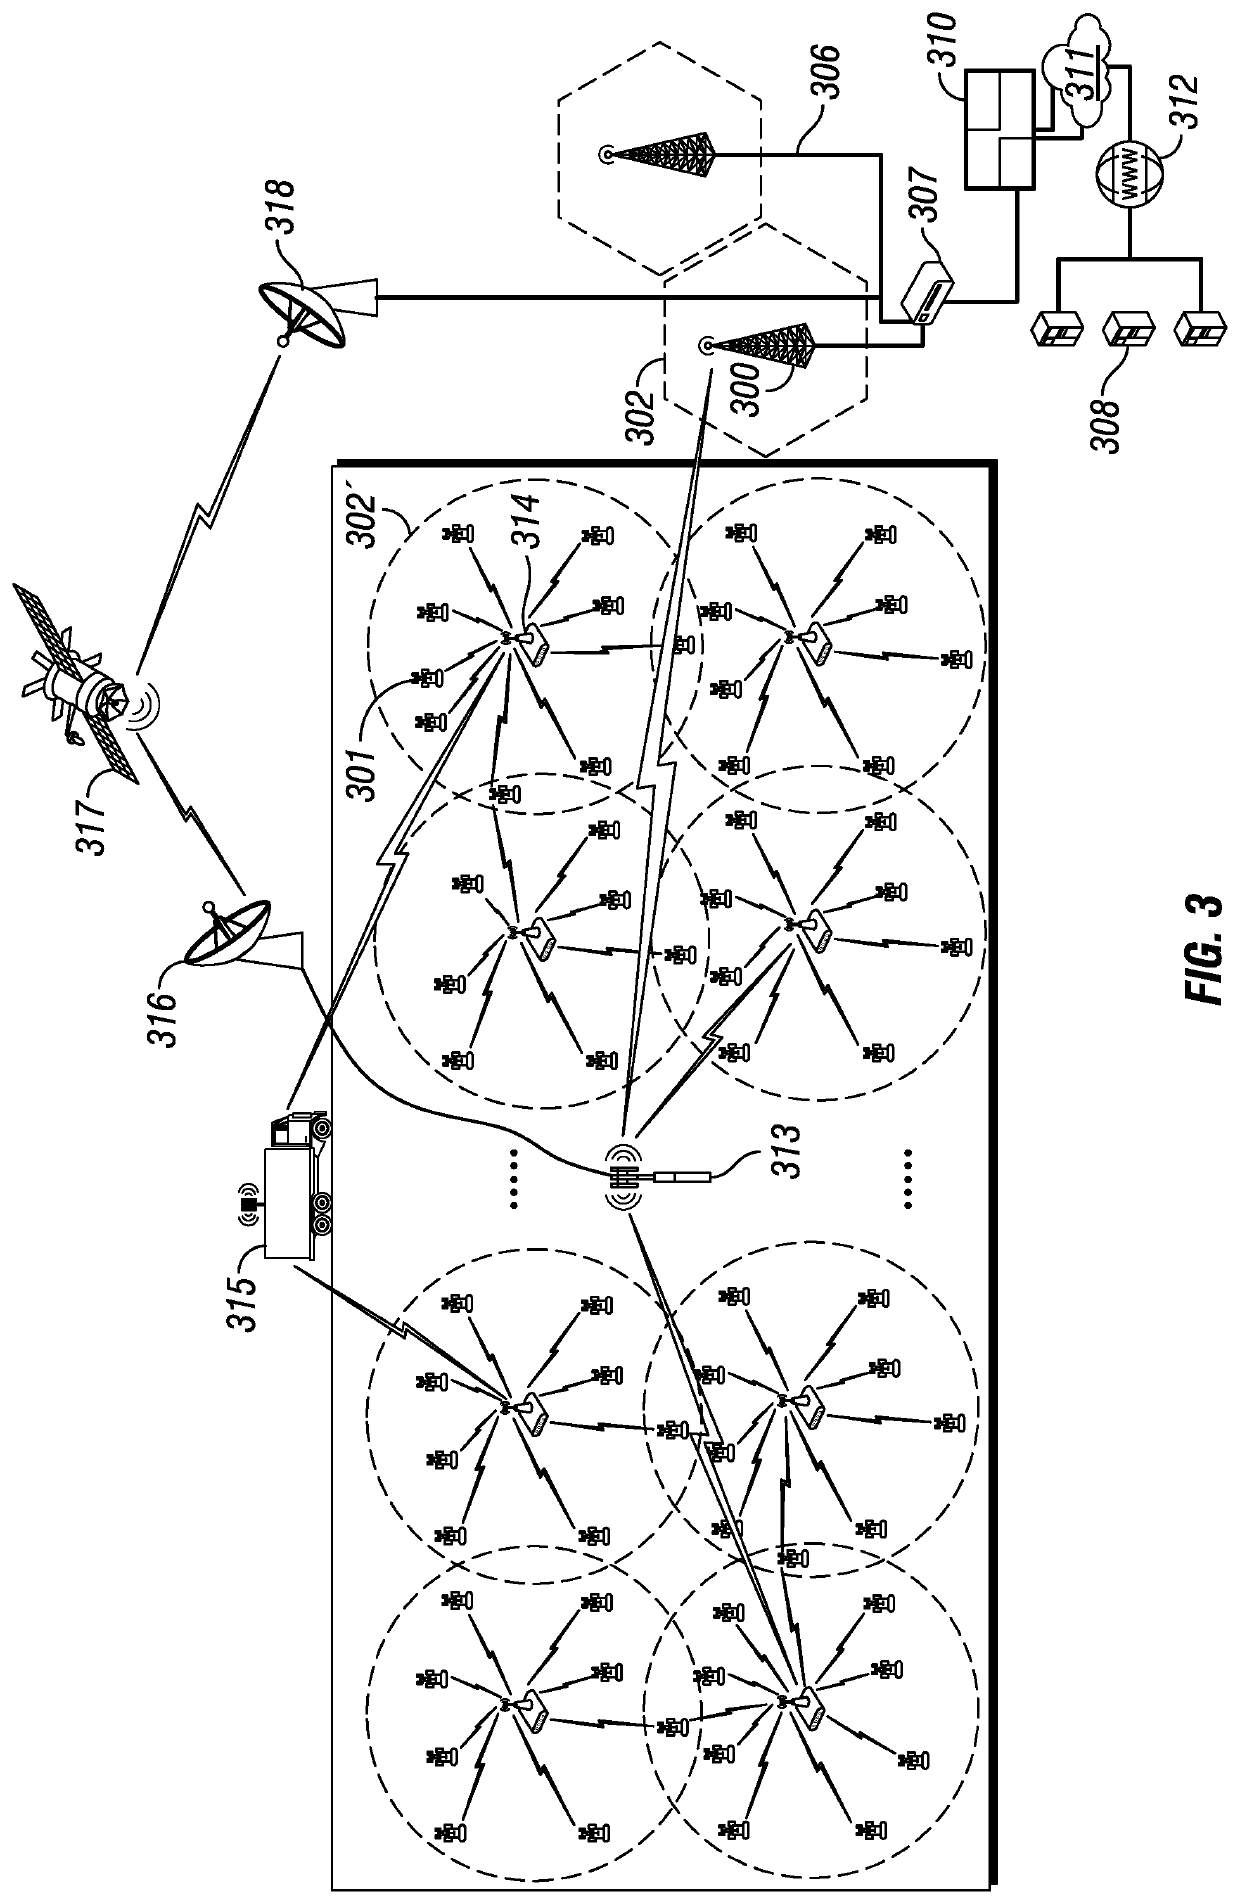 Method, seismic sensor and system for wireless seismic networking